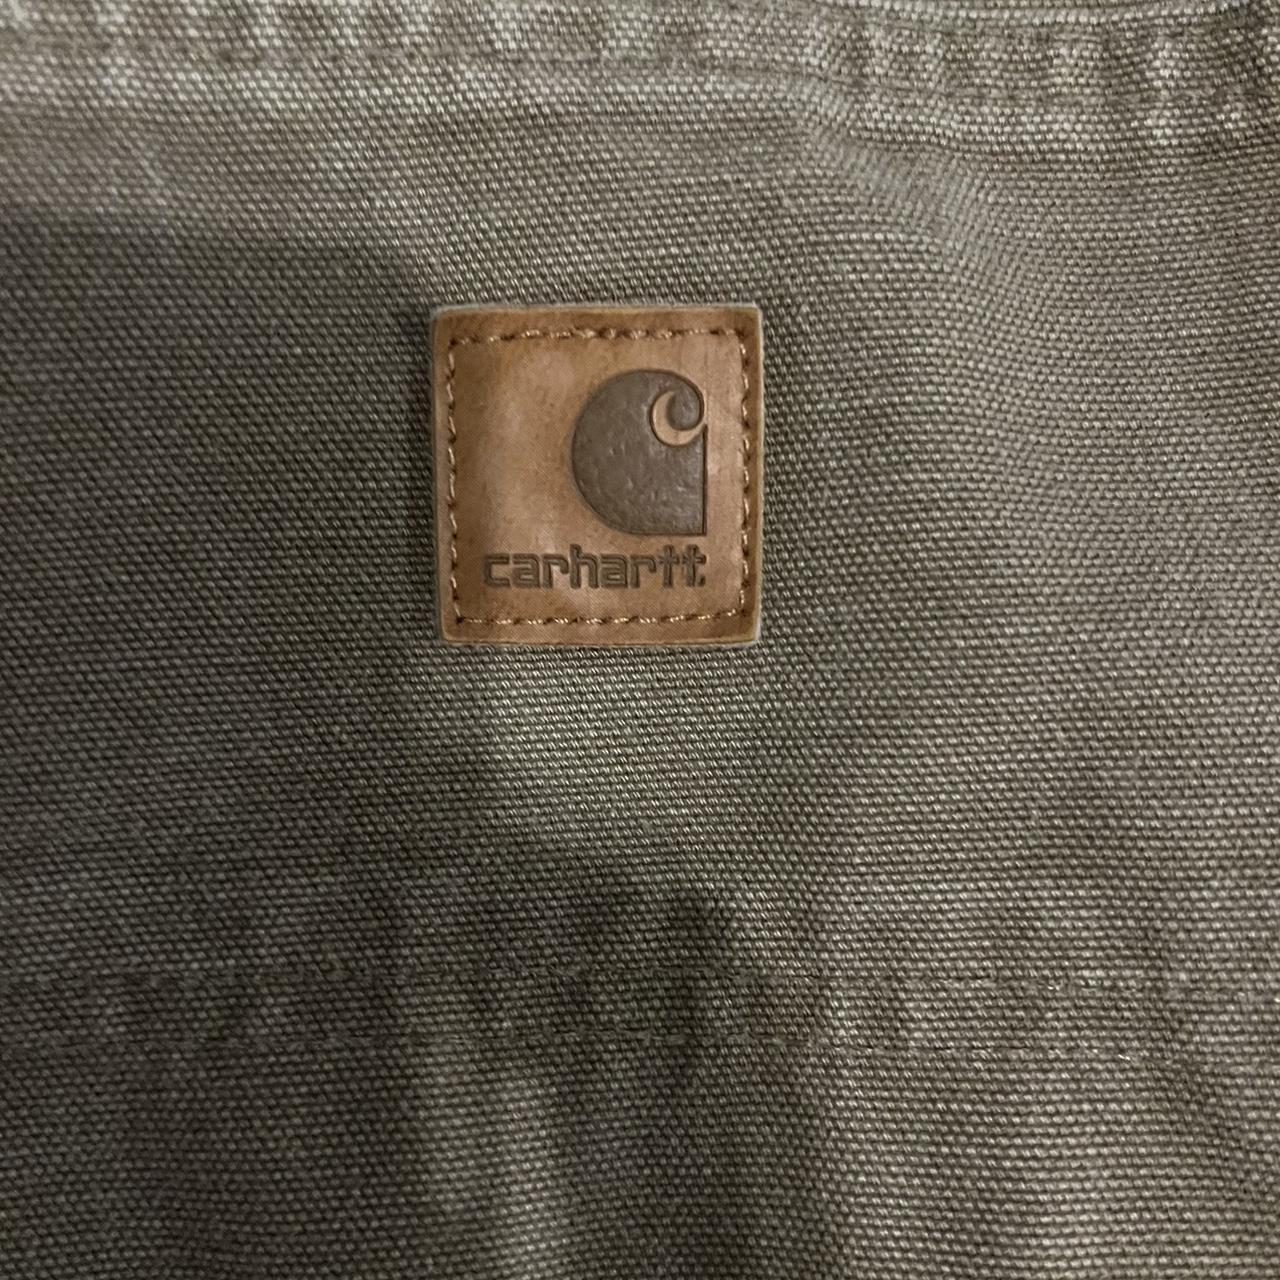 Vintage Carhartt Pants Crazy Awesome Fade 40x34 - Depop